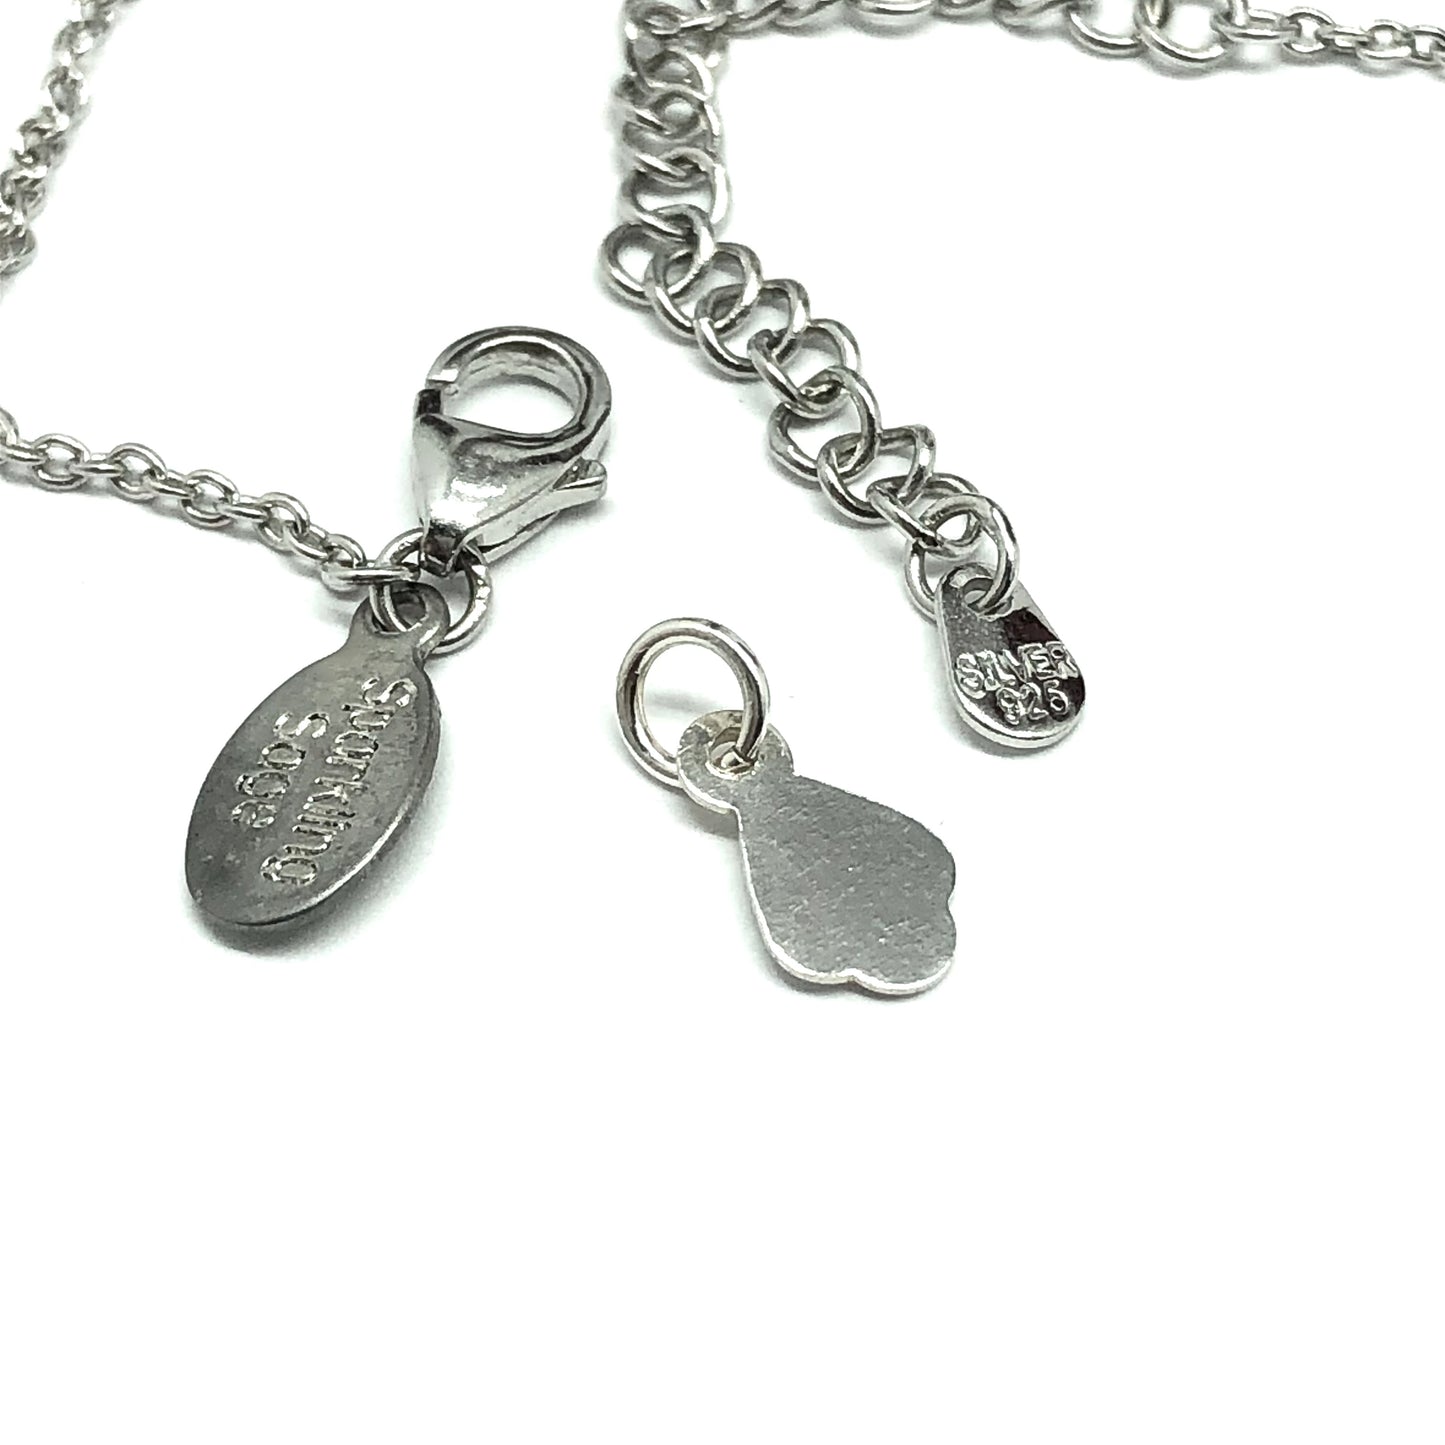 Sterling Silver Scalloped Chain Hang Tag, Hallmark Tag, Stamp Tag, w/ Jumpring - Jewelry Findings